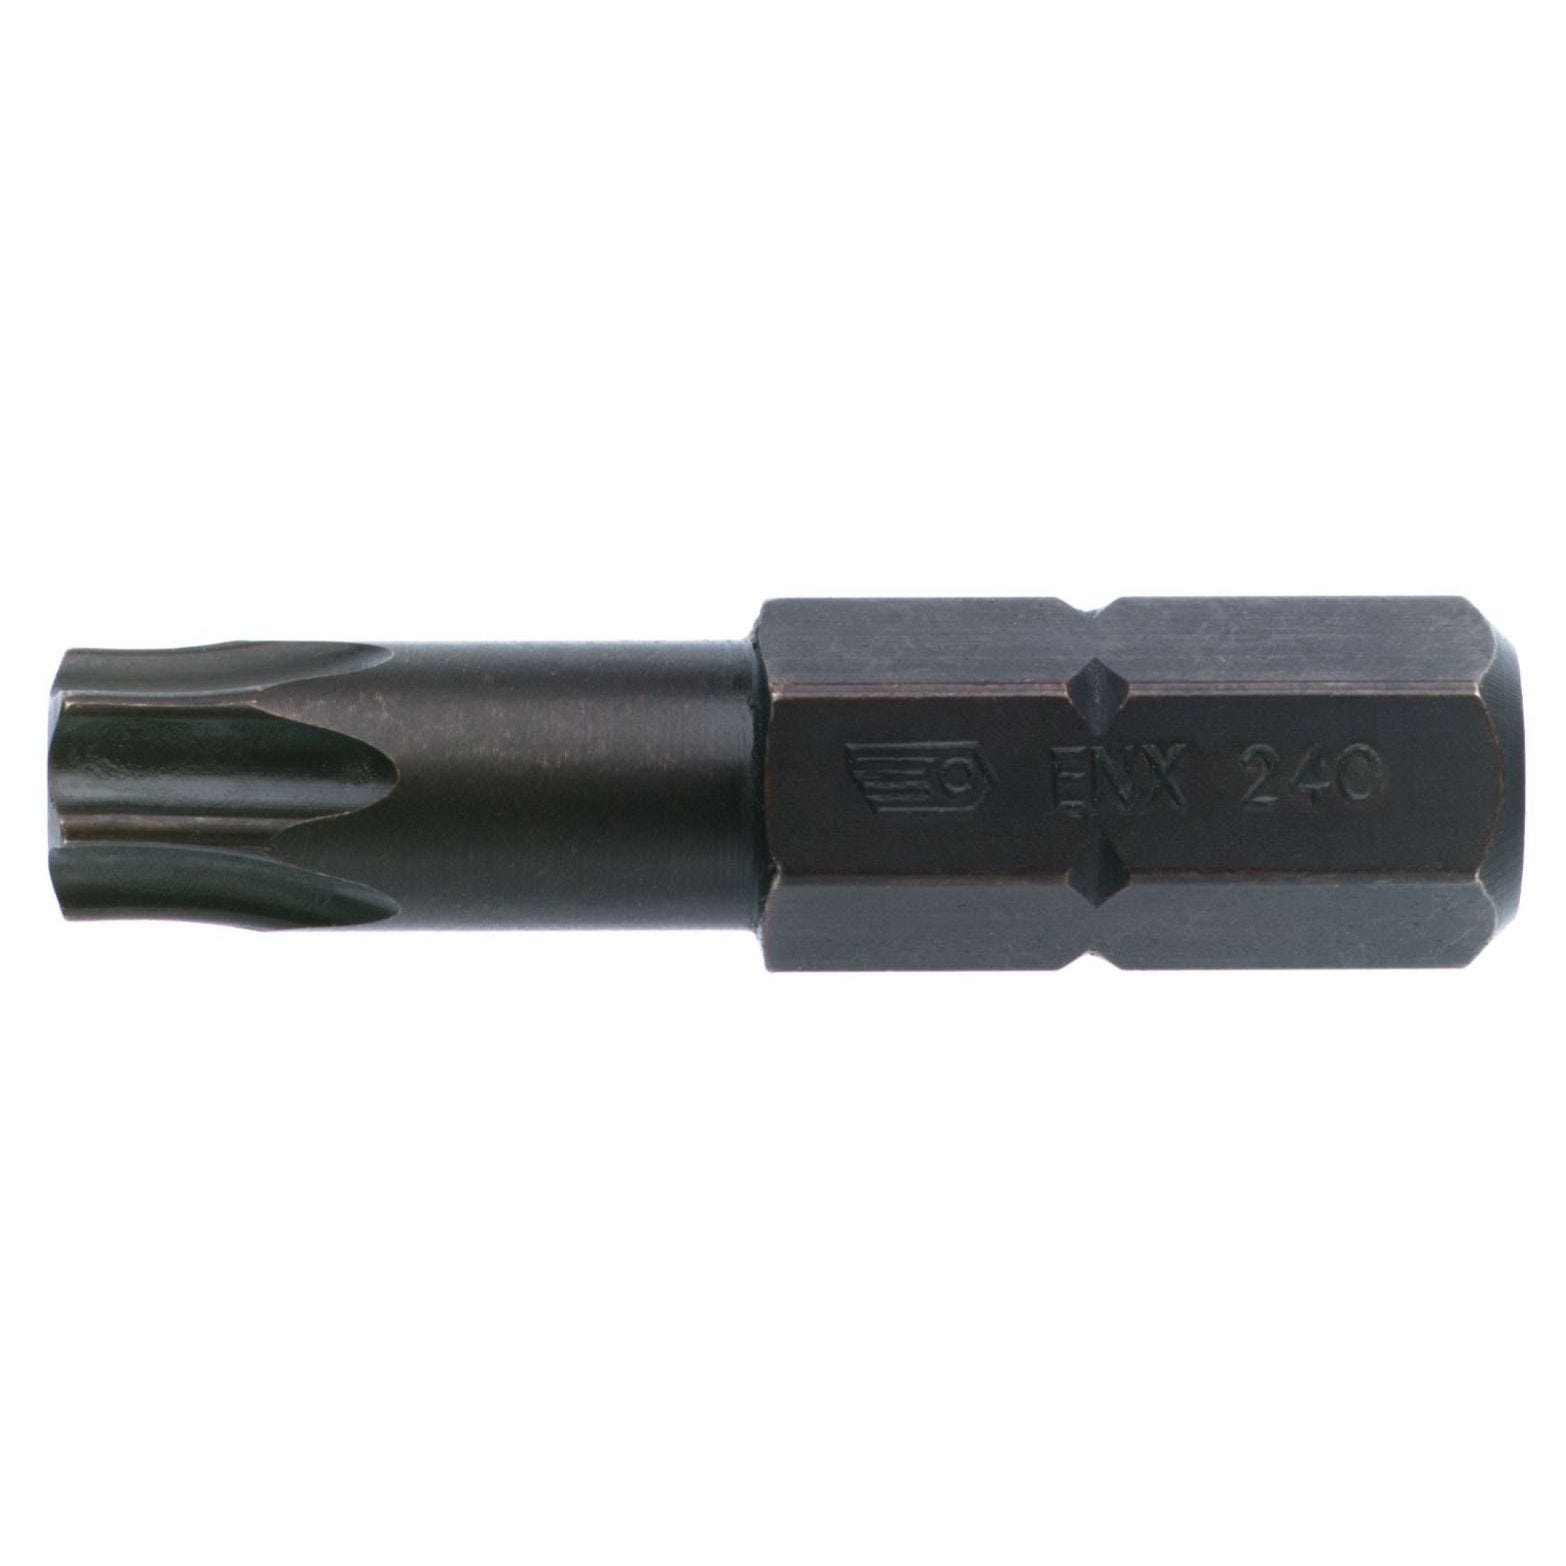 Embout torx taille 30 Facom ENX230 0